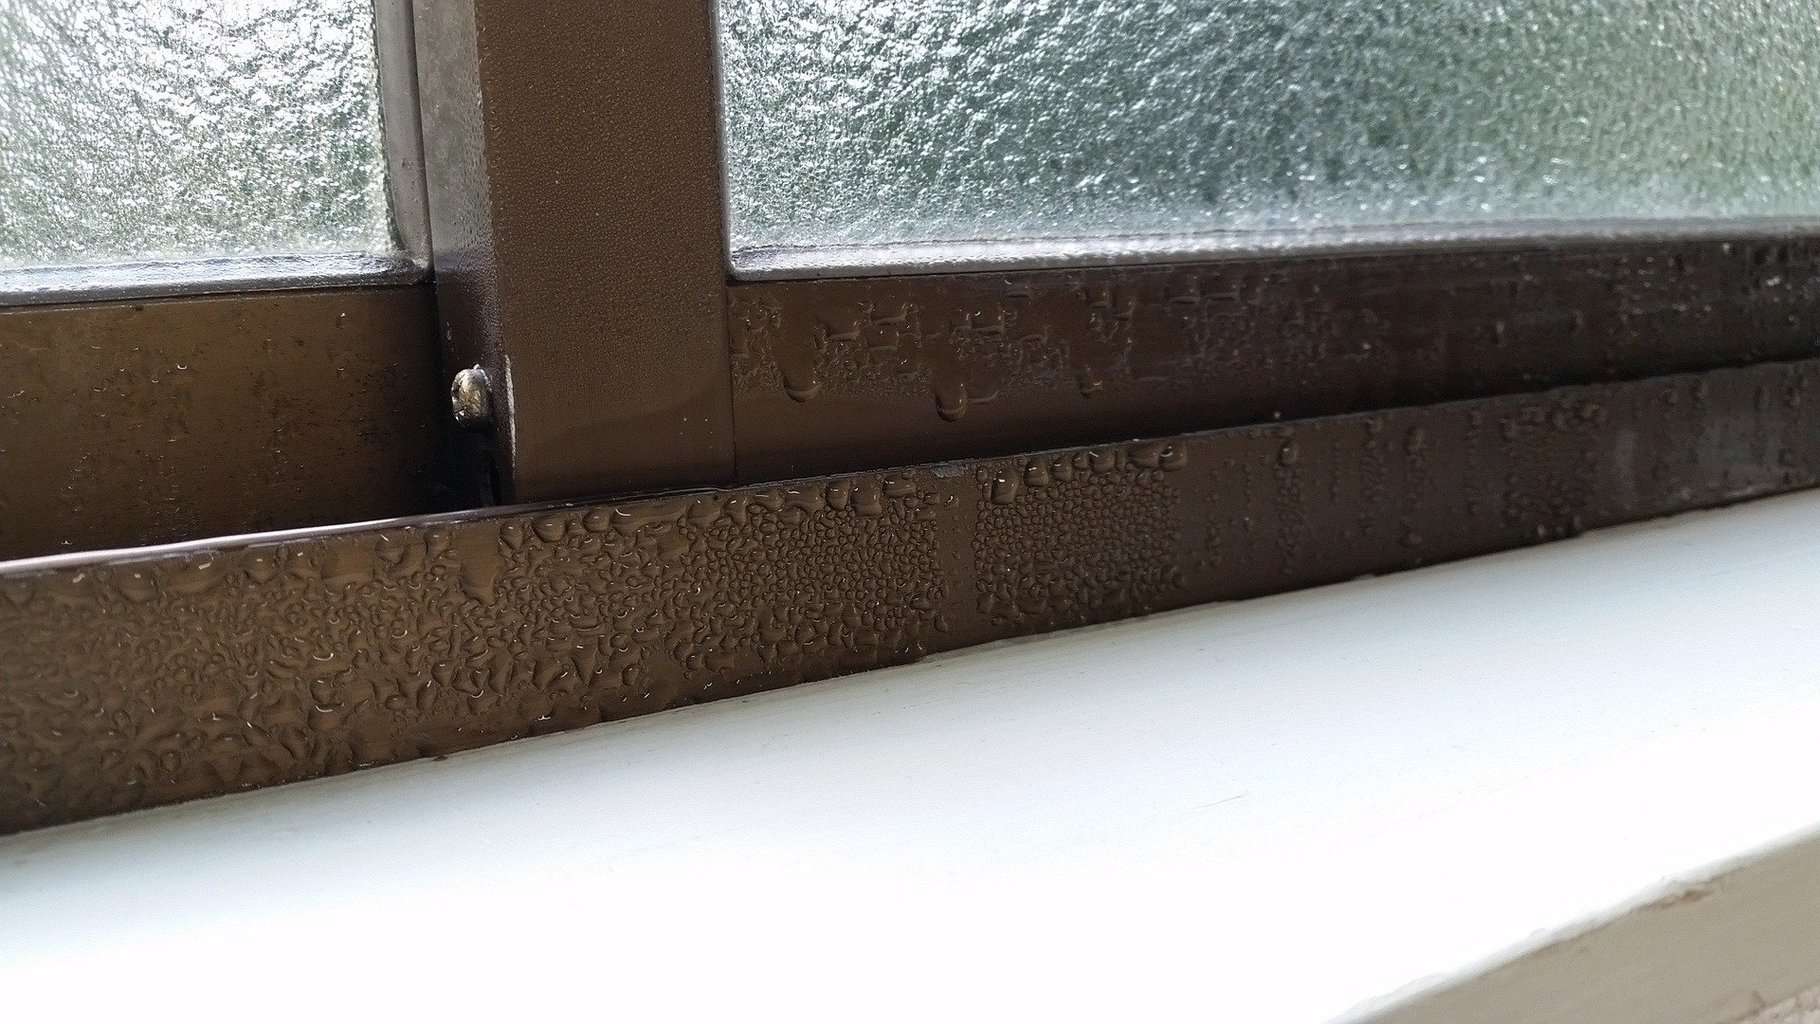 Window condensation is natural but definitely preventable! Here are some tips on how to keep window condensation at bay